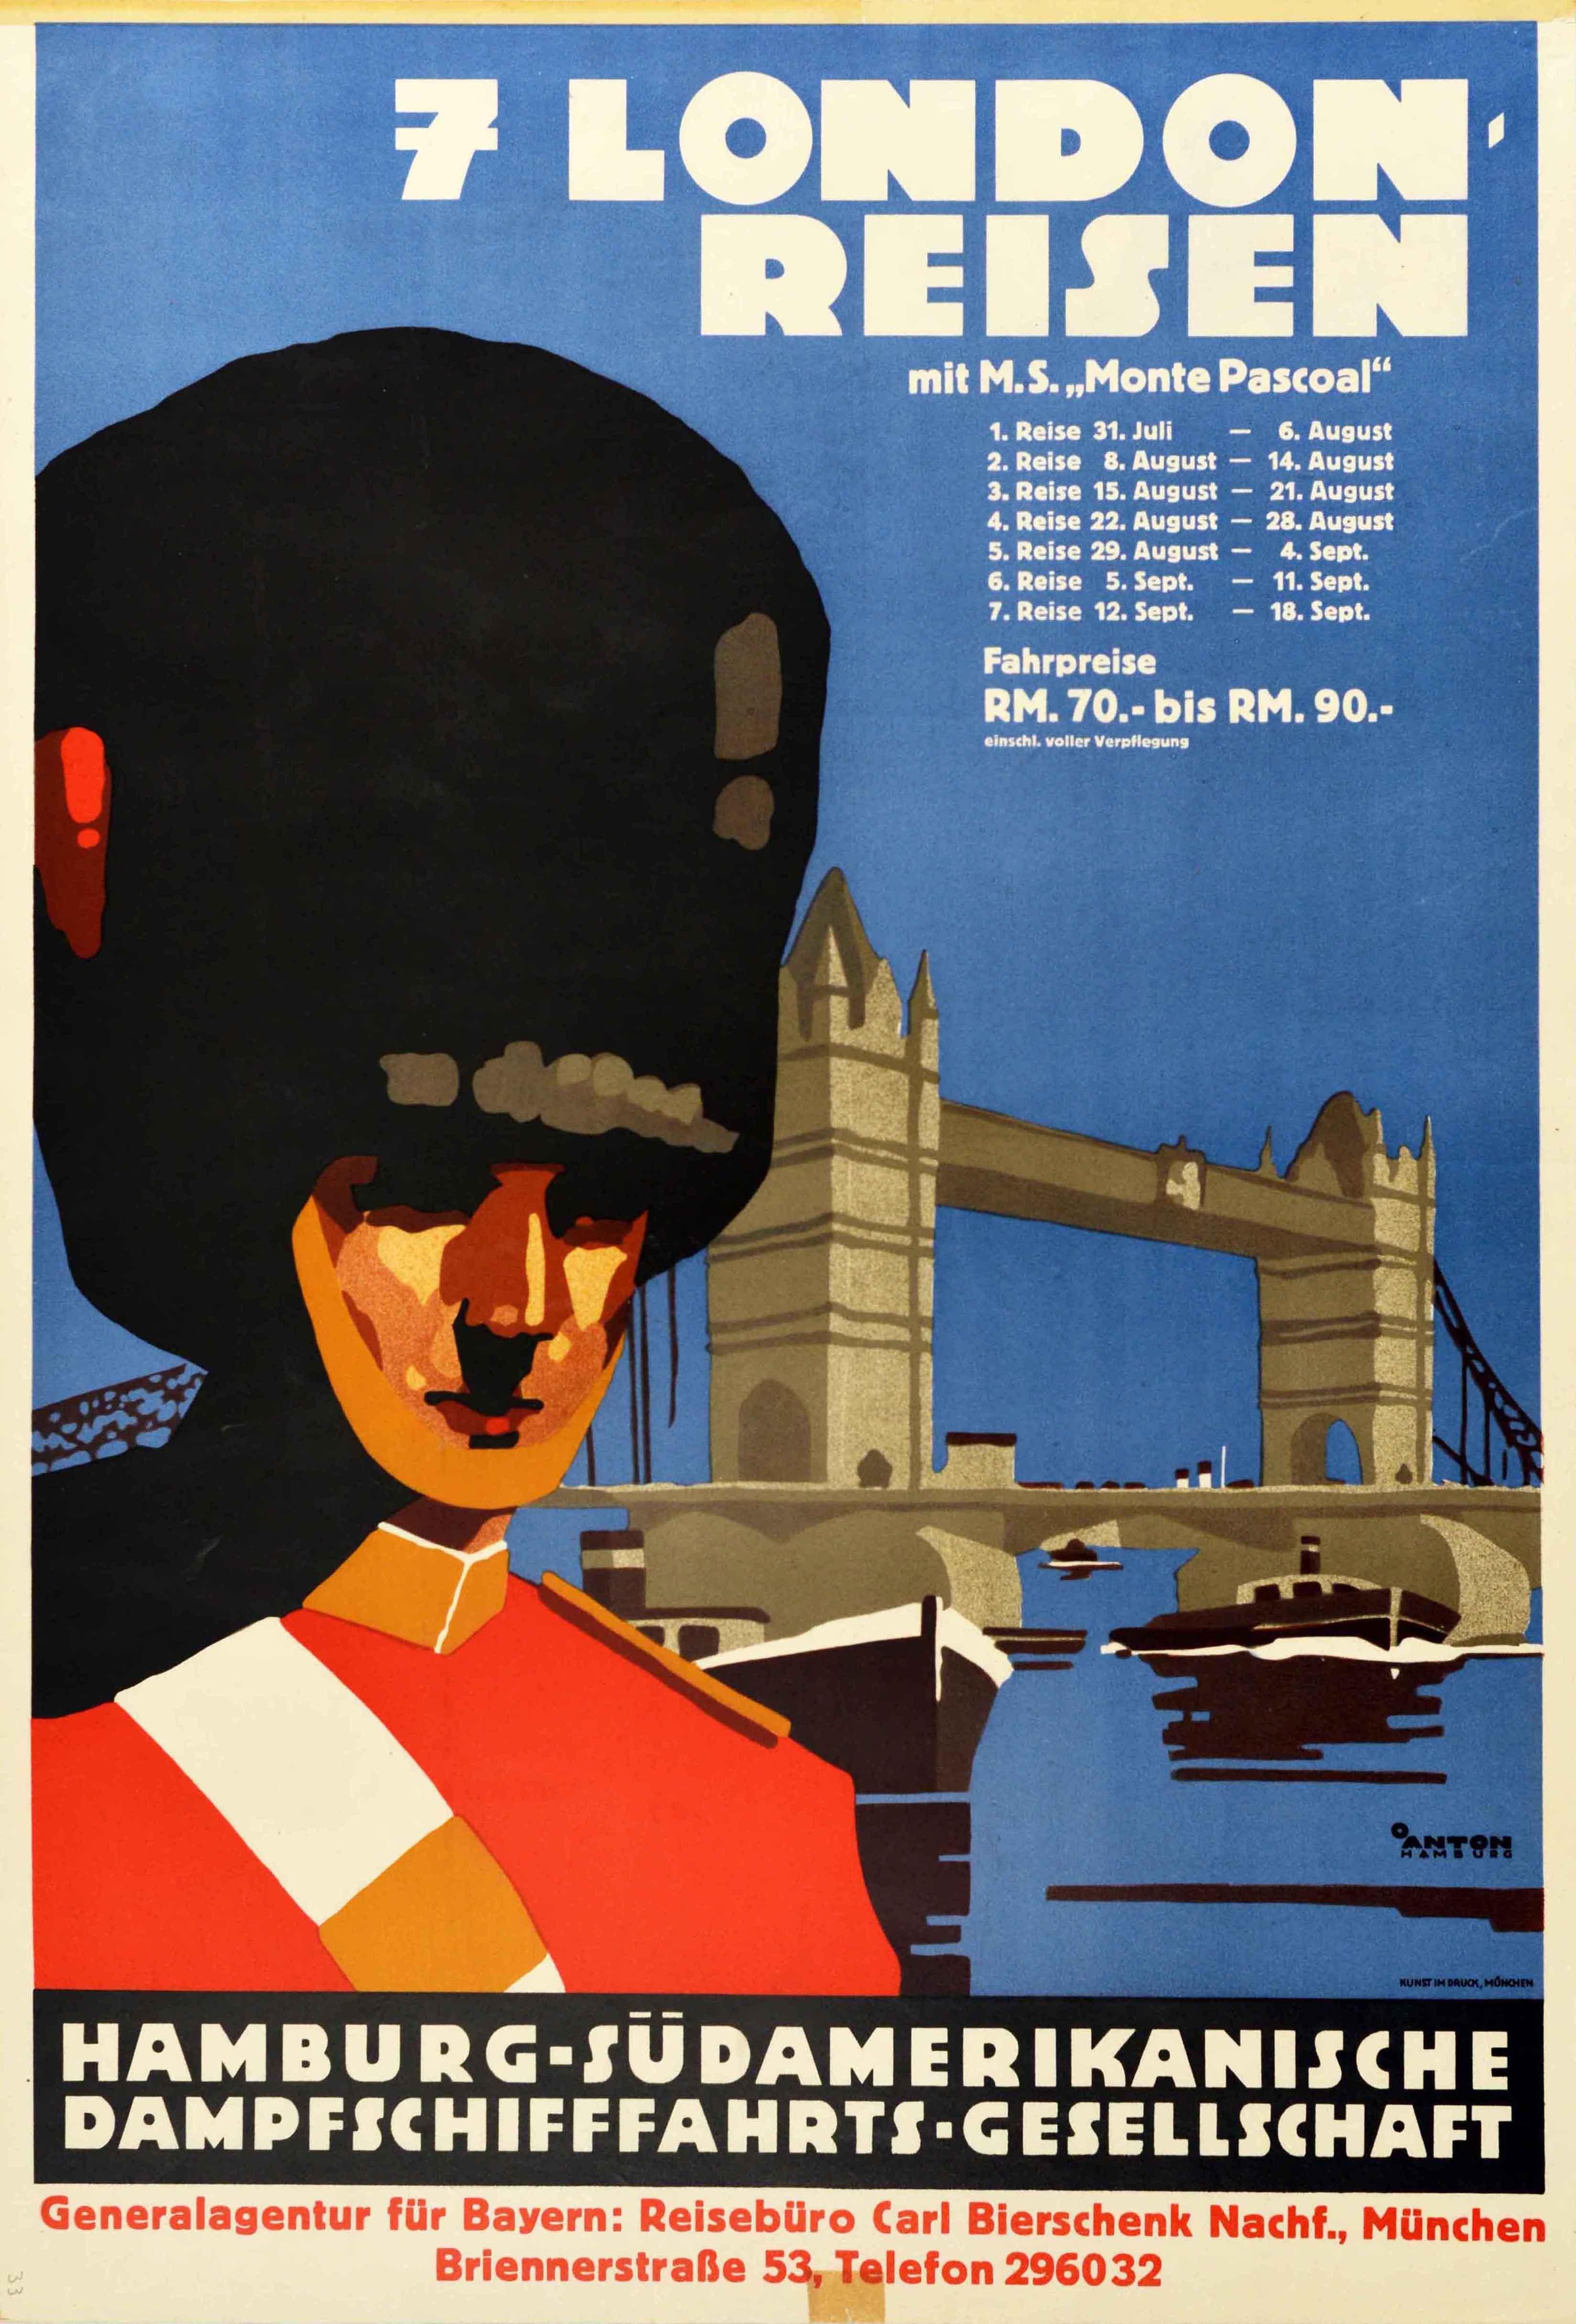 Original vintage cruise ship travel poster advertising Seven Day London travel on the M.S. Monte Pascoal in July, August and September from RM70-90 full board with the Hamburg Sud Hamburg South America Steamship Company / 7 London reisen mit MS